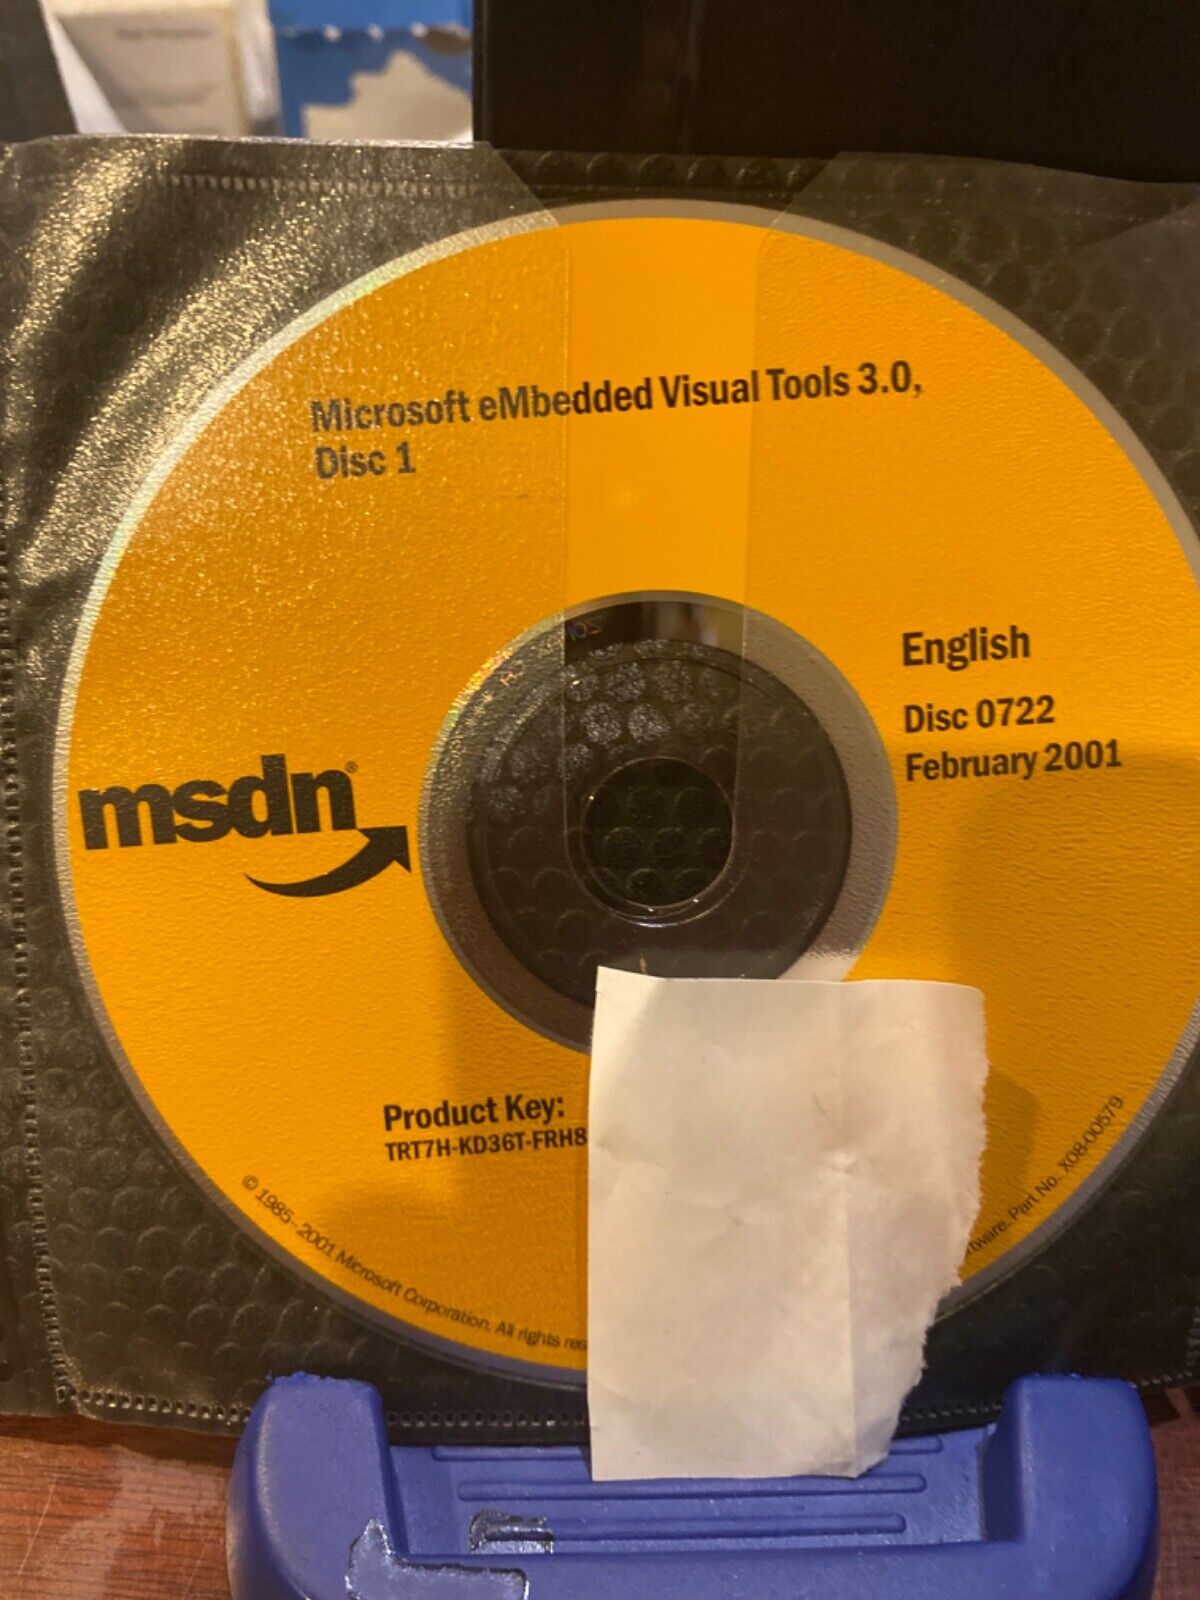 RARE NEW AUTHENTIC MSDN Microsoft eMbedded Visual Tools 3.0. Product Key 2Discs.